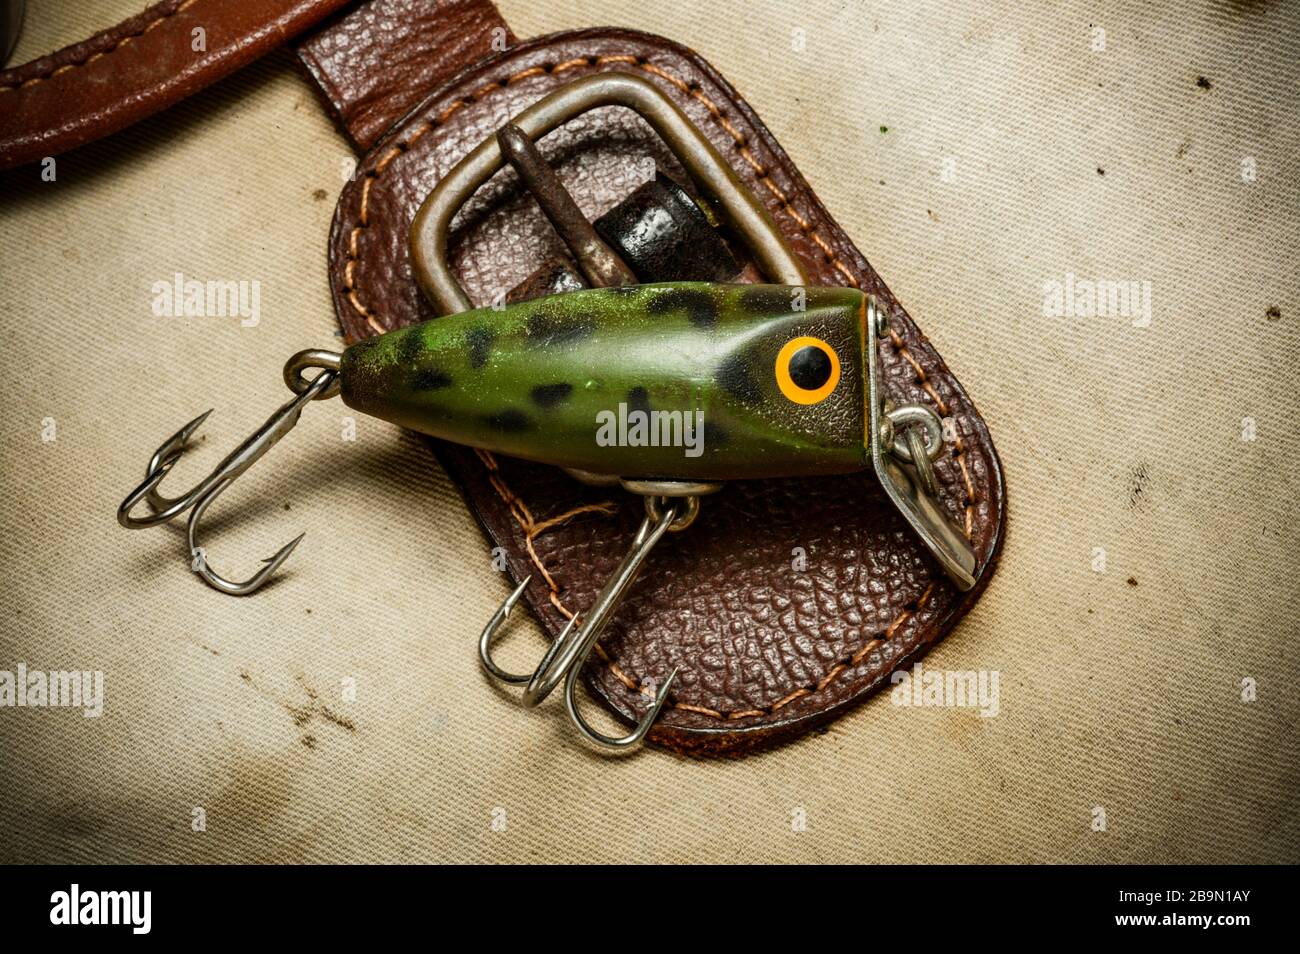 An example of a vintage fishing lure equipped with treble hooks, possibly  made by Woods Mfg, displayed on an old fishing bag. Lures such as these are  Stock Photo - Alamy